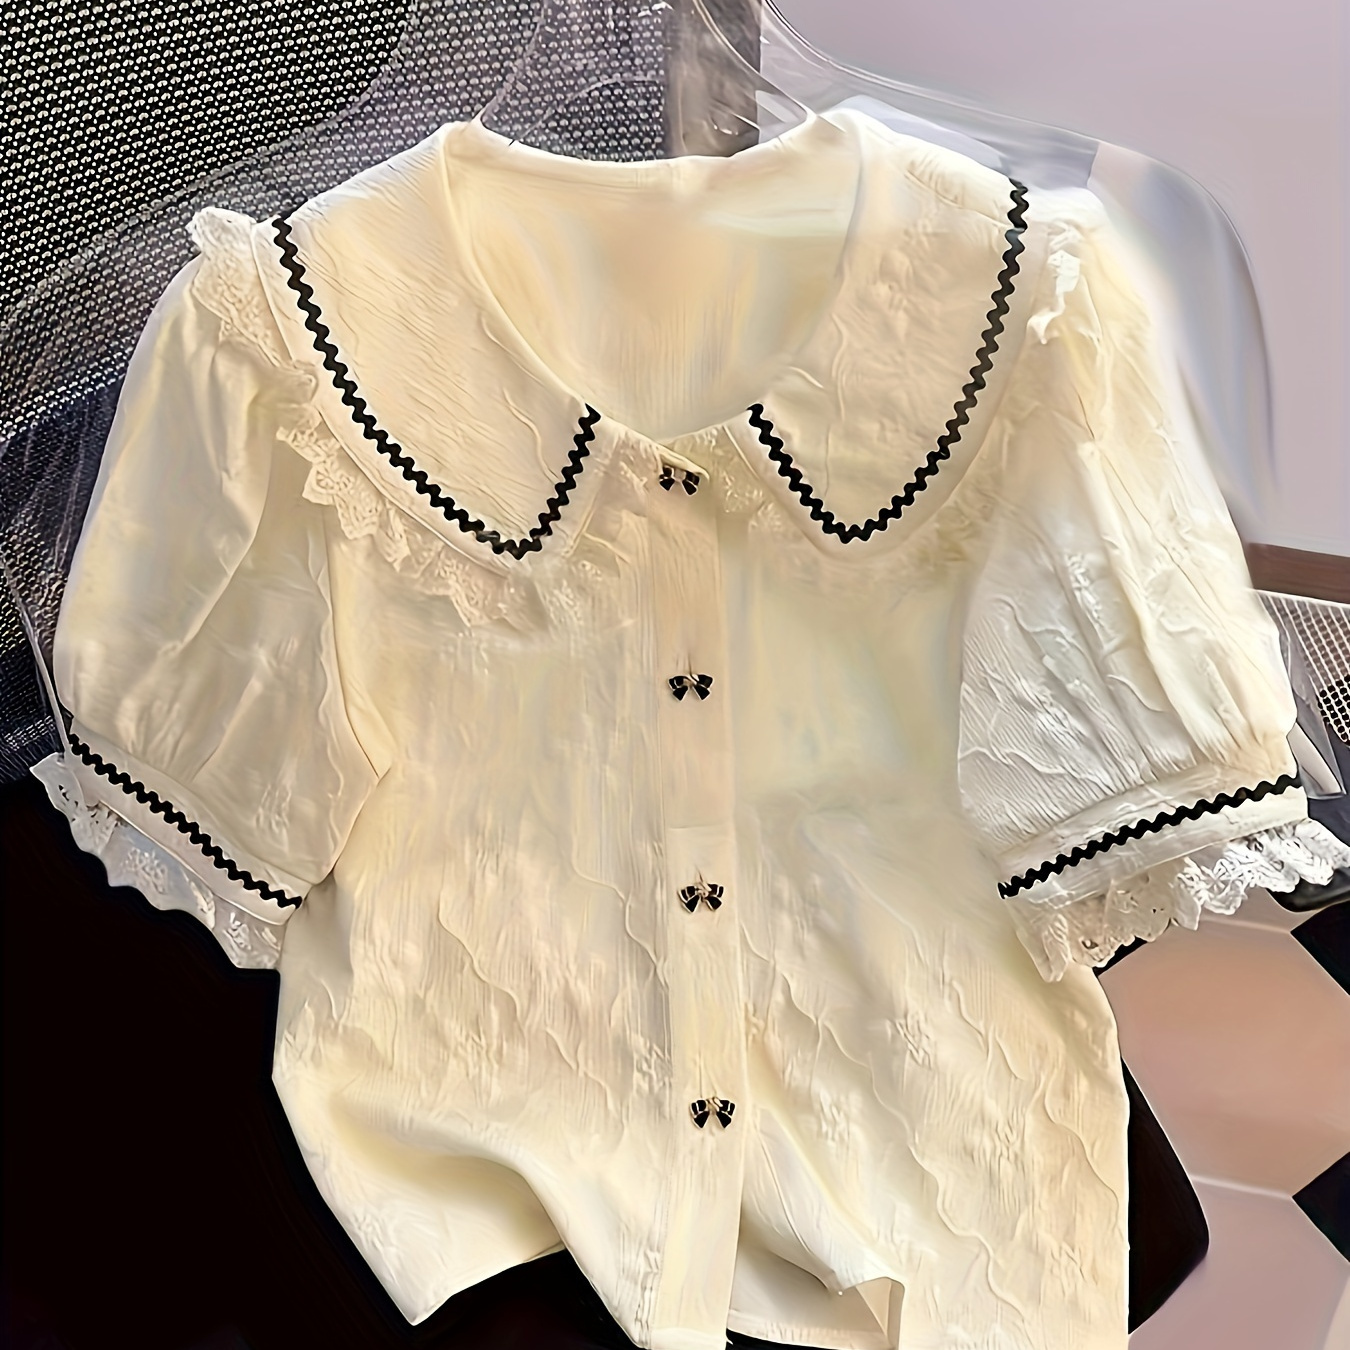 

Lace Trim Button Front Shirt, Sweet Contrast Trim Puff Sleeve Doll Neck Shirt For Spring & Summer, Women's Clothing